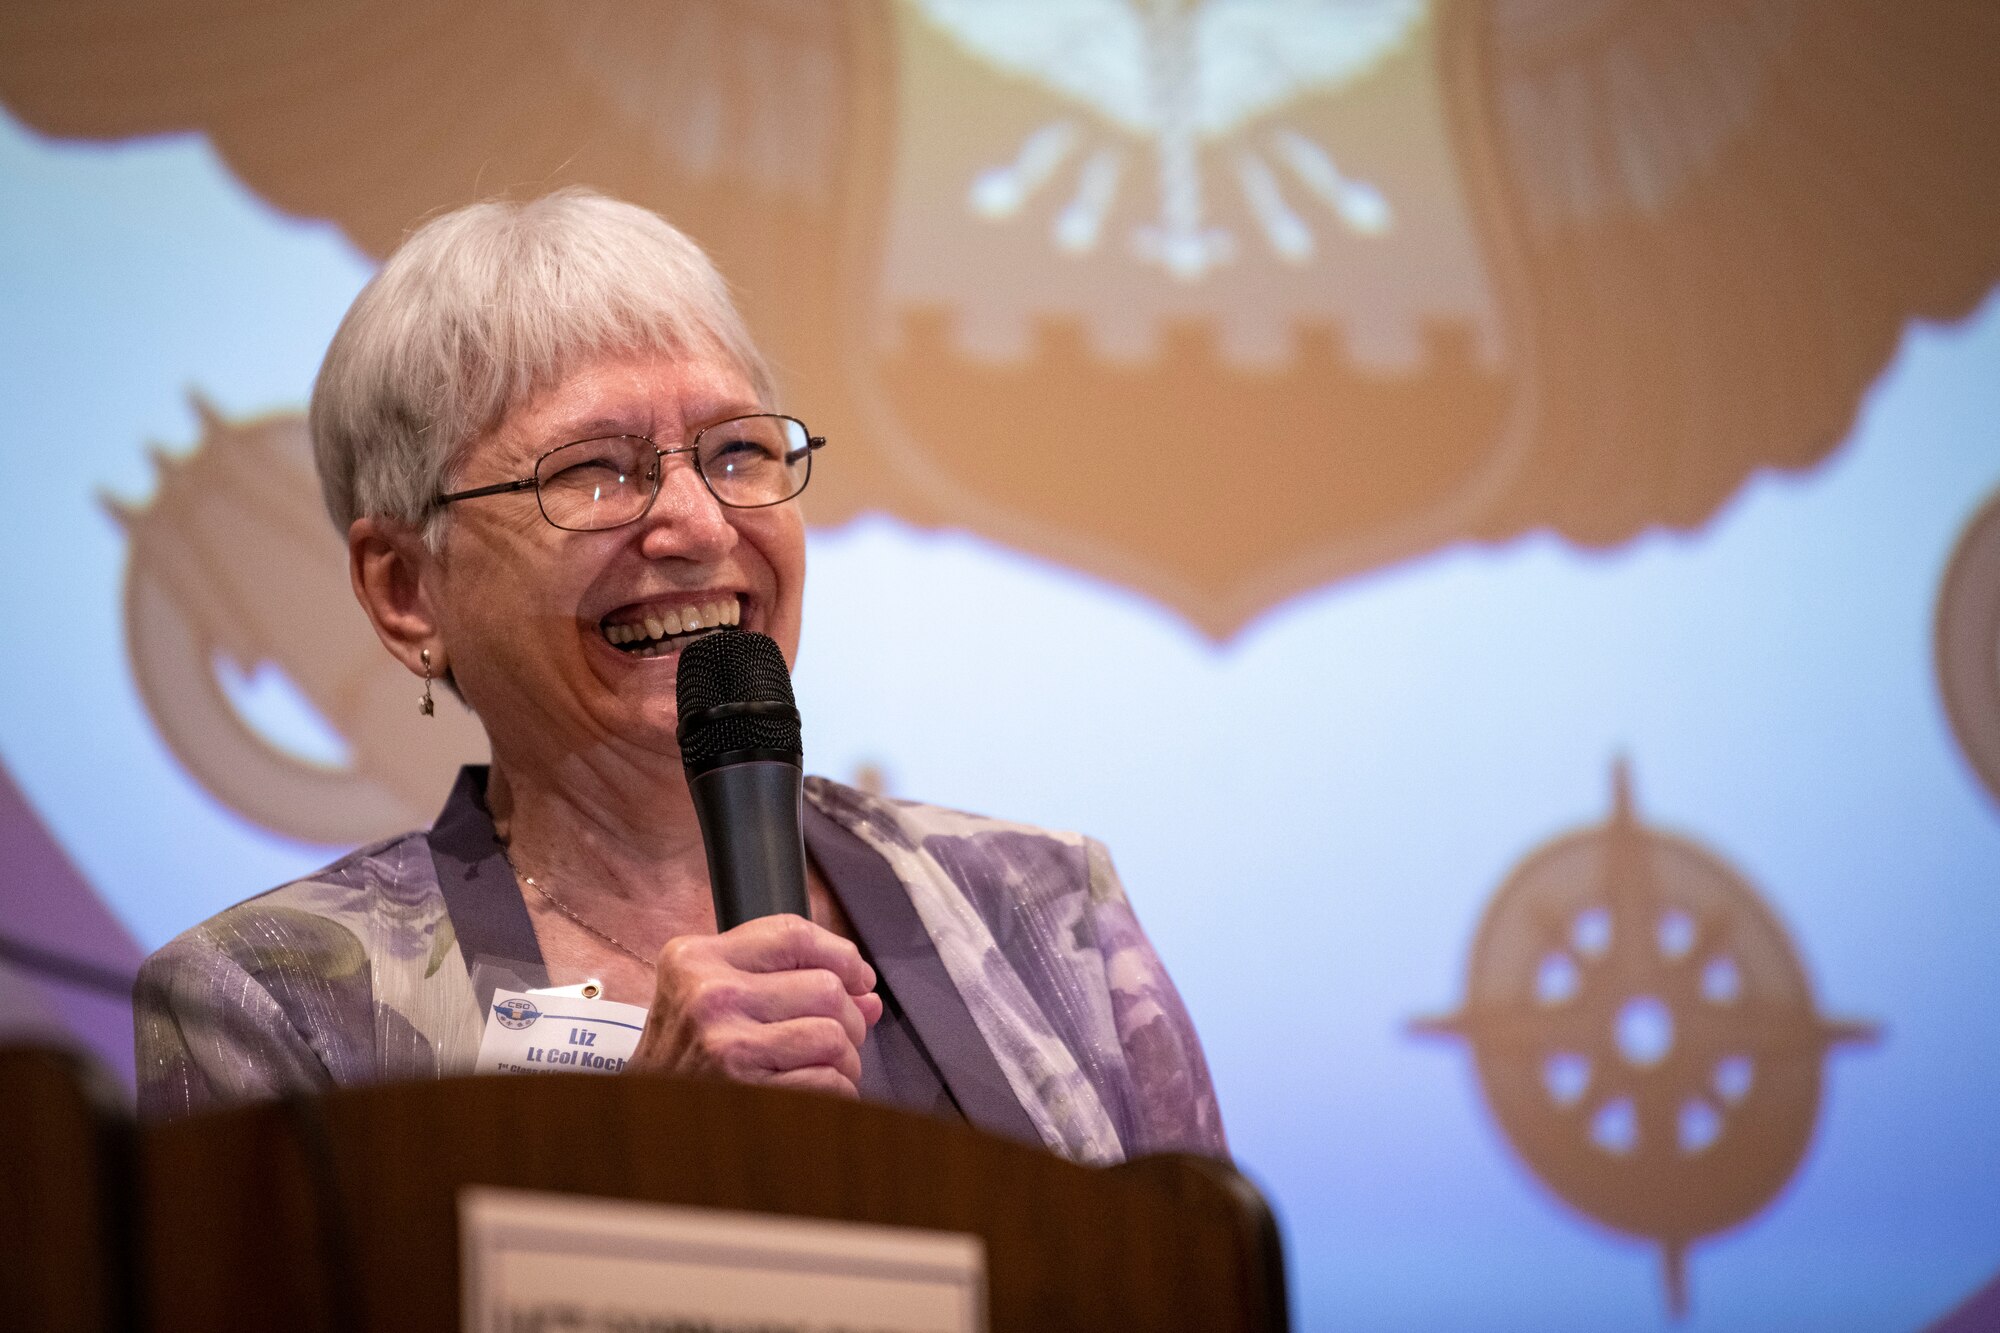 Lt. Col. (Ret.) Elizabeth Koch spoke to a gathering of fellow members of UNT 78-01 and their successors at NAS Pensacola during a celebration of their barrier breaking feat.